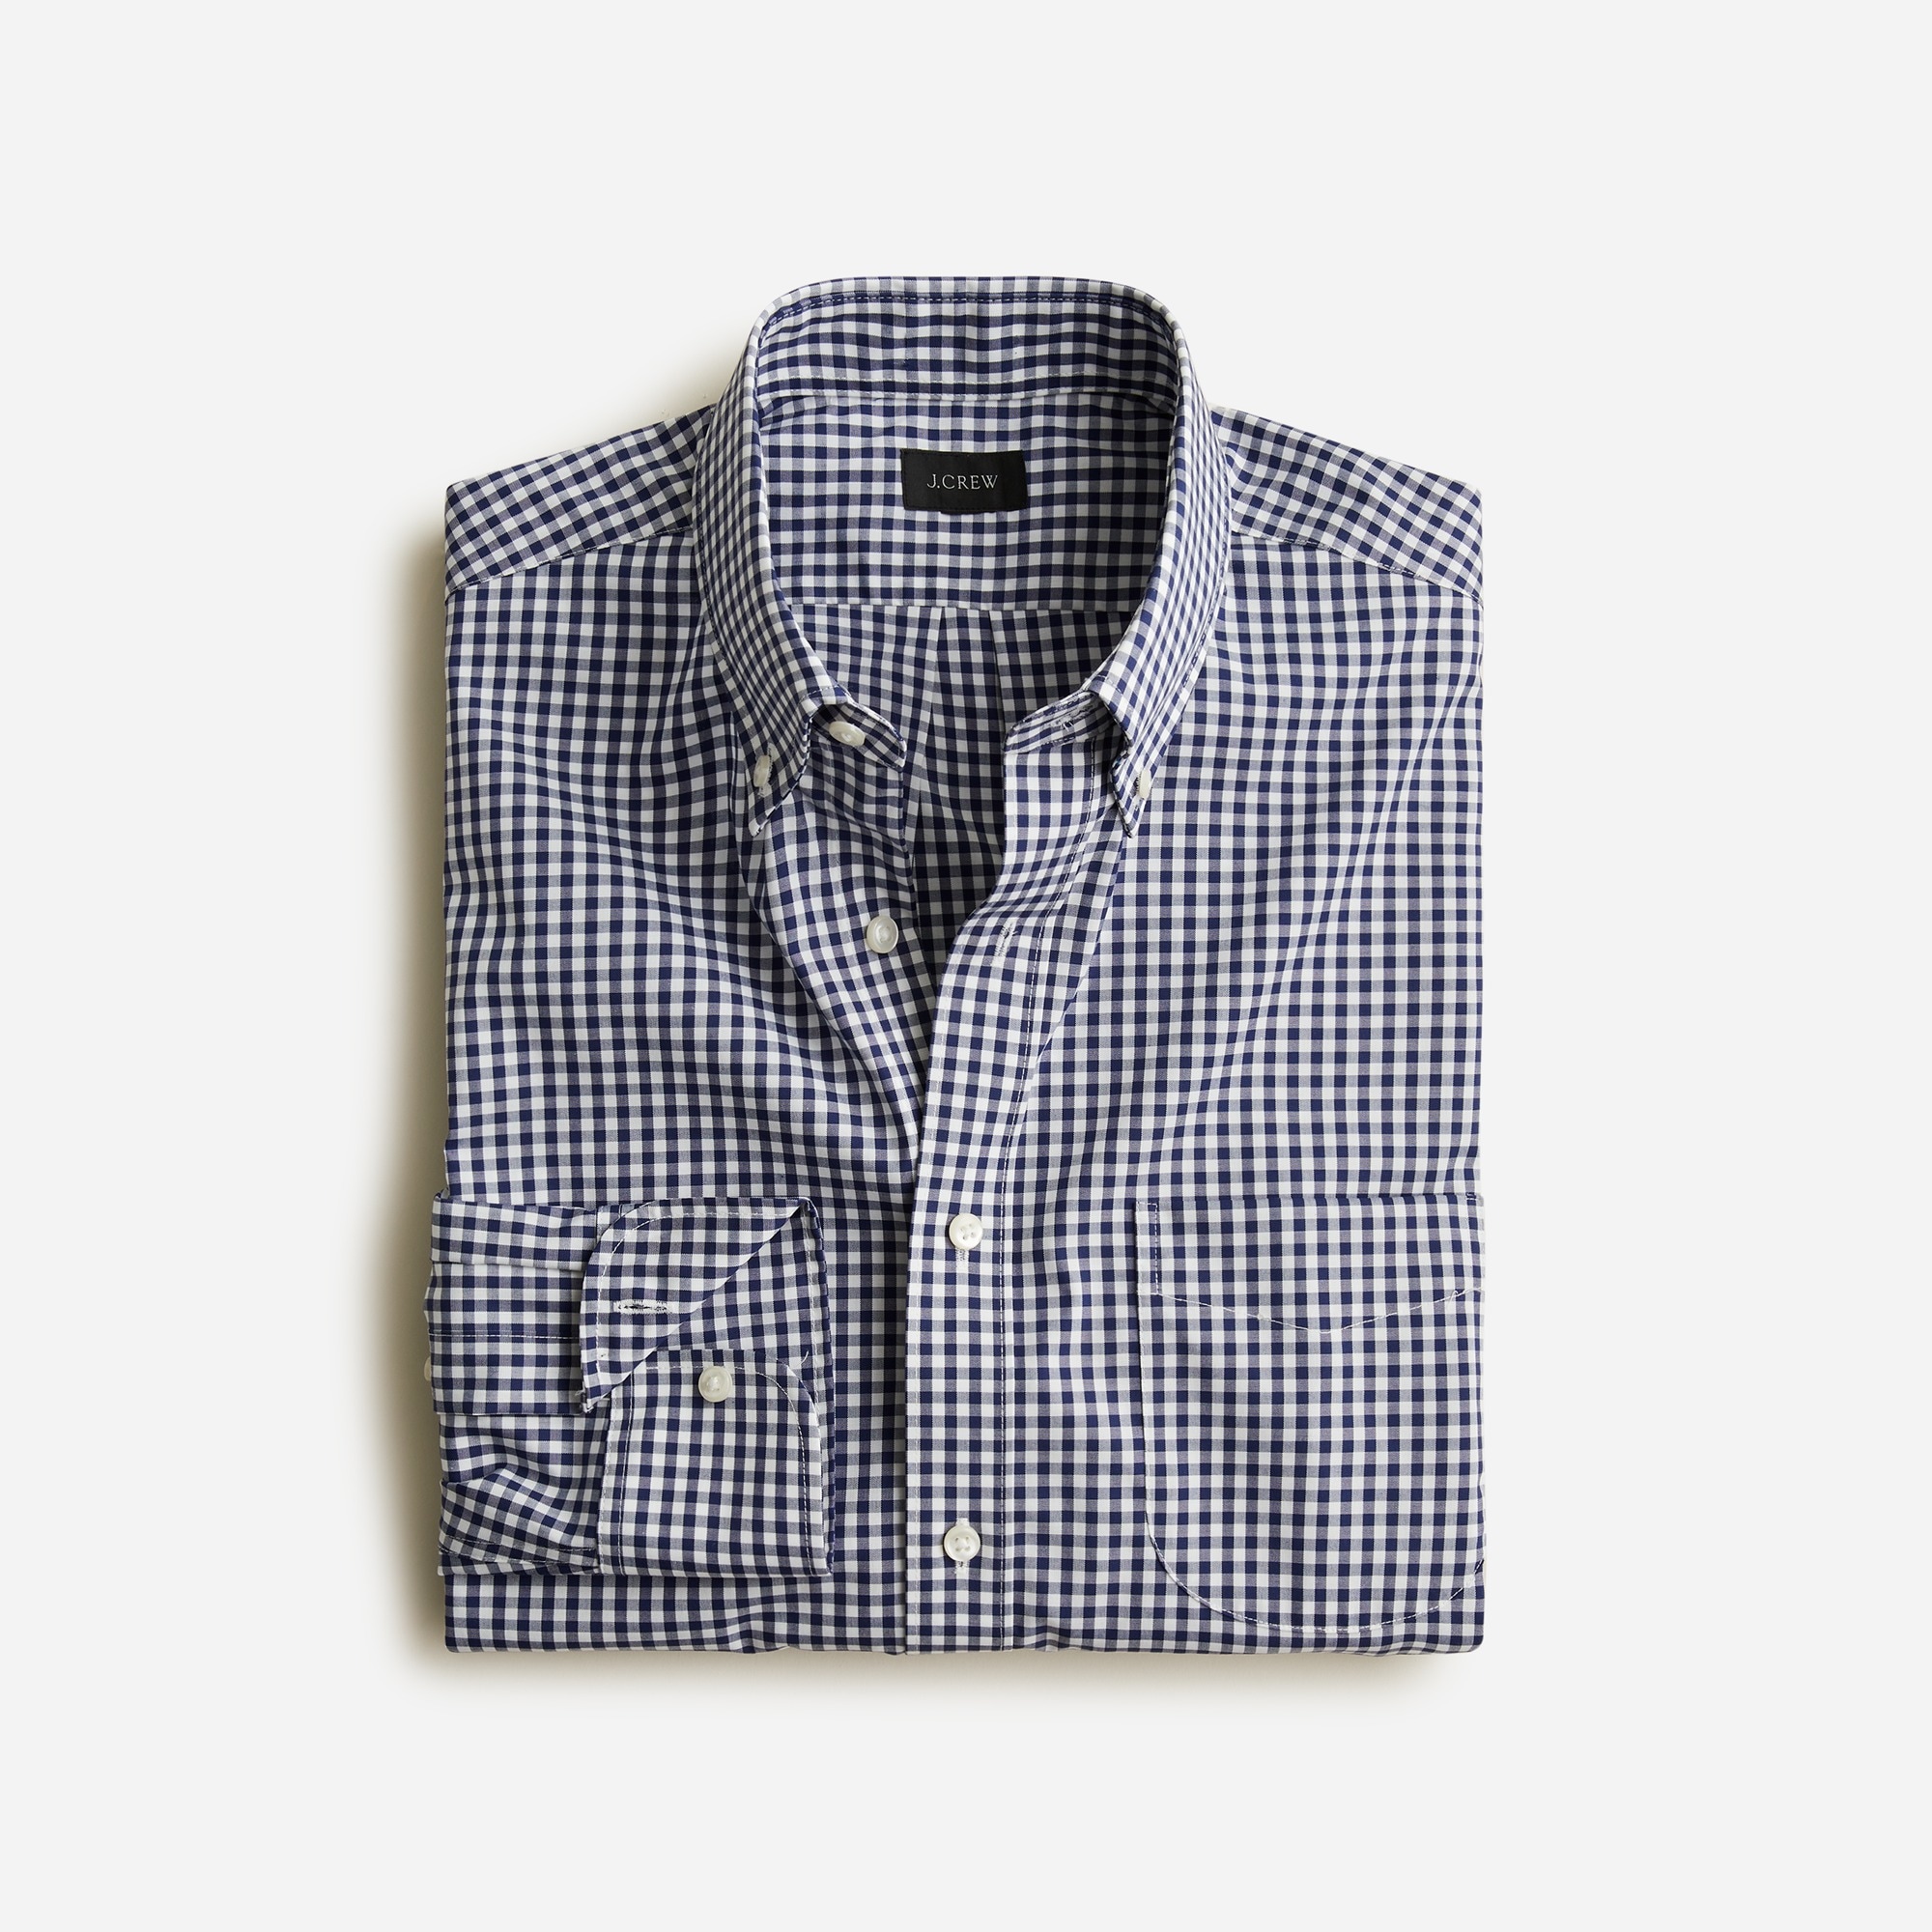  Tall Bowery wrinkle-free dress shirt with button-down collar